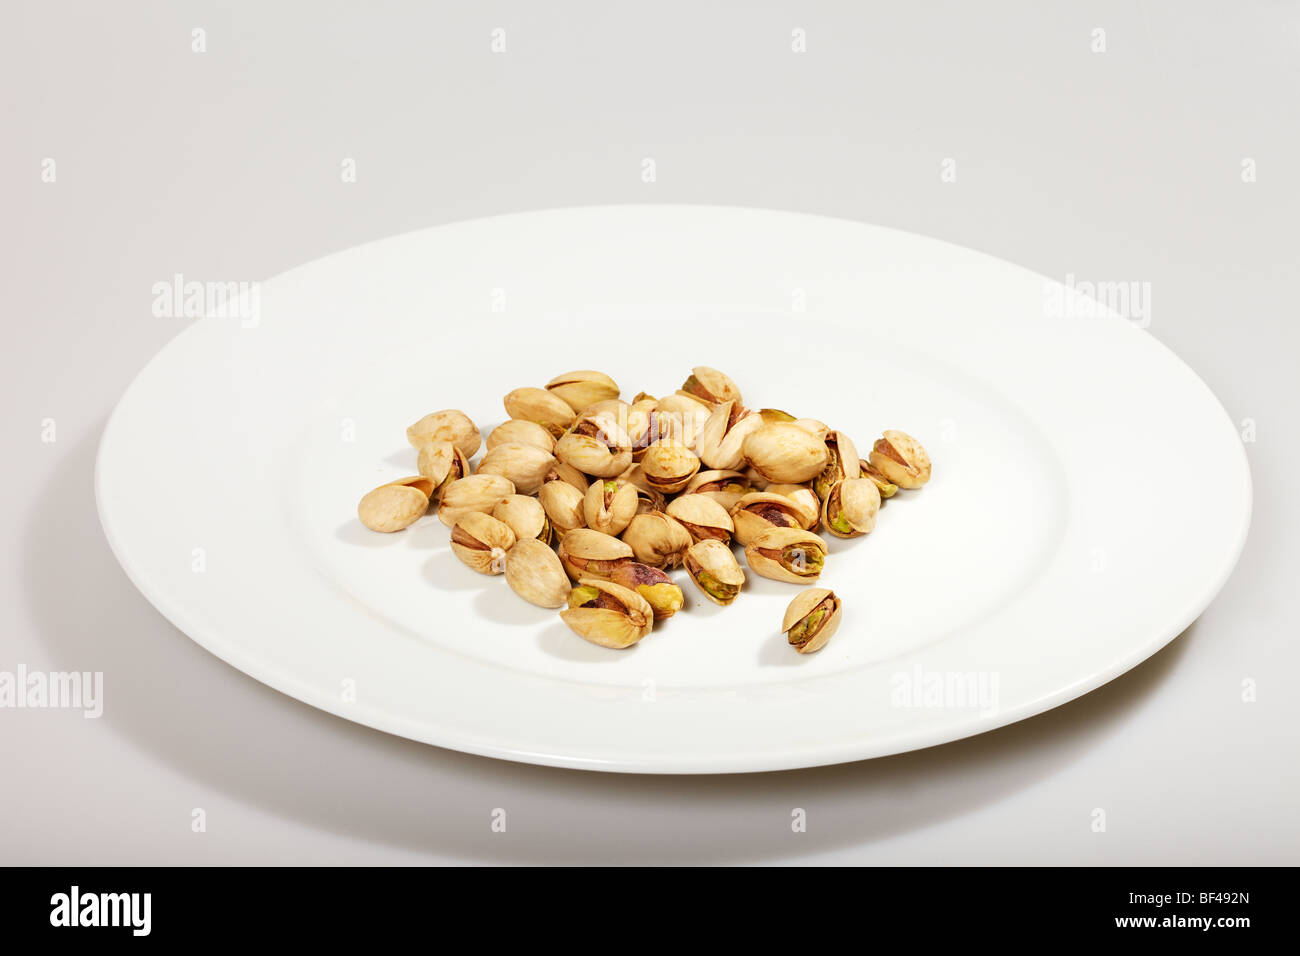 Pistachio Nuts on a White Plate Stock Photo